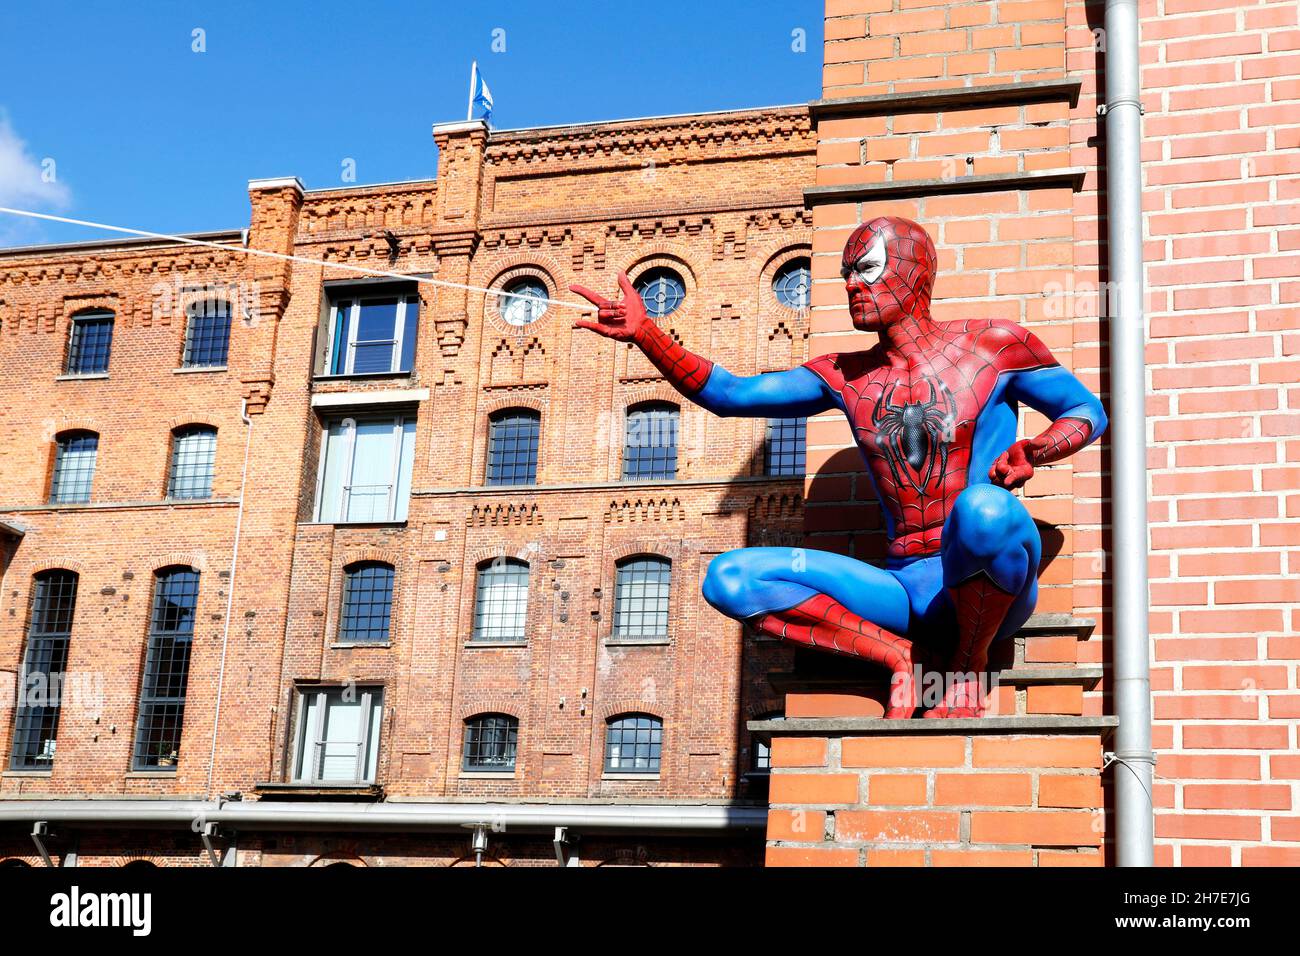 From the Colored Bodies Calendar 2022 - Geek Art-Bodypainting and Transformaking: Spider-Man photoshooting with Patrick at the Hefehof in Hamelin. A project by the photographer Tschiponnique Skupin and the bodypainter Enrico Lein. Stock Photo